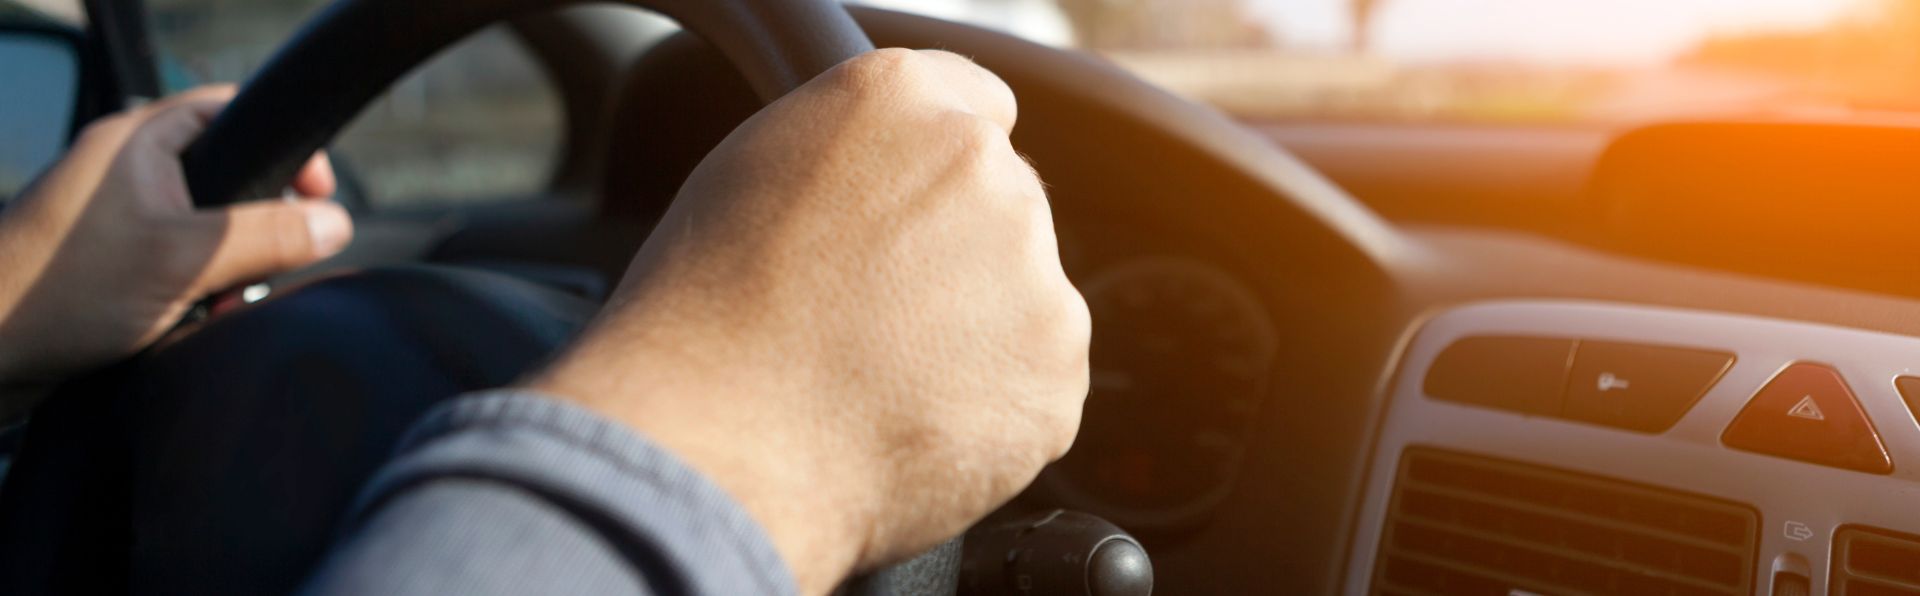 7 Tips for New Drivers to Overcome Anxiety on the Road